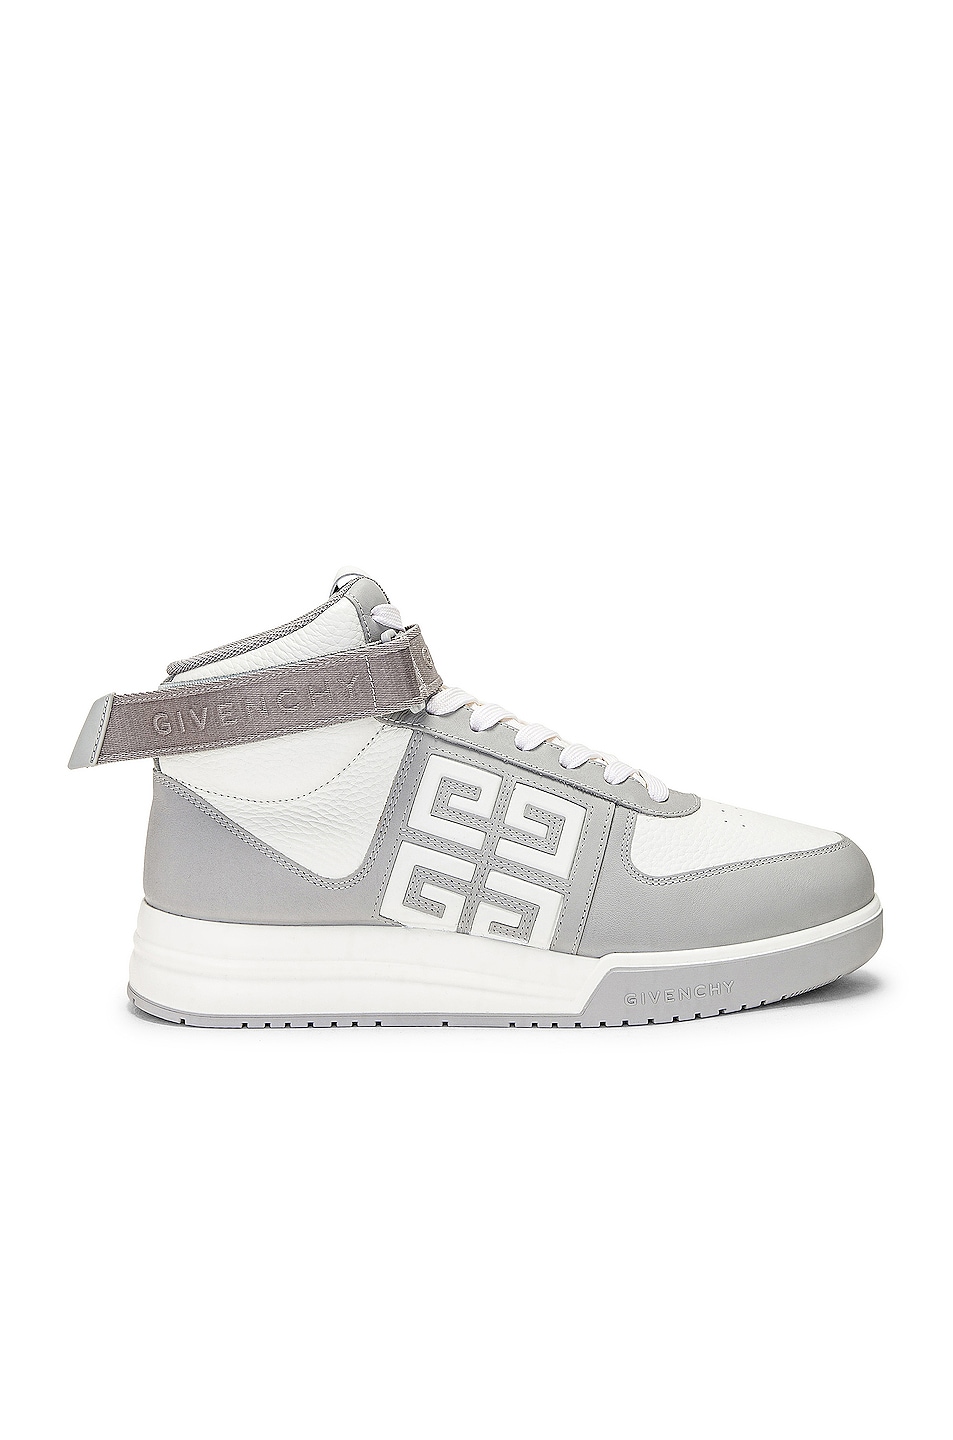 Image 1 of Givenchy G4 High Top Sneaker in Grey & White